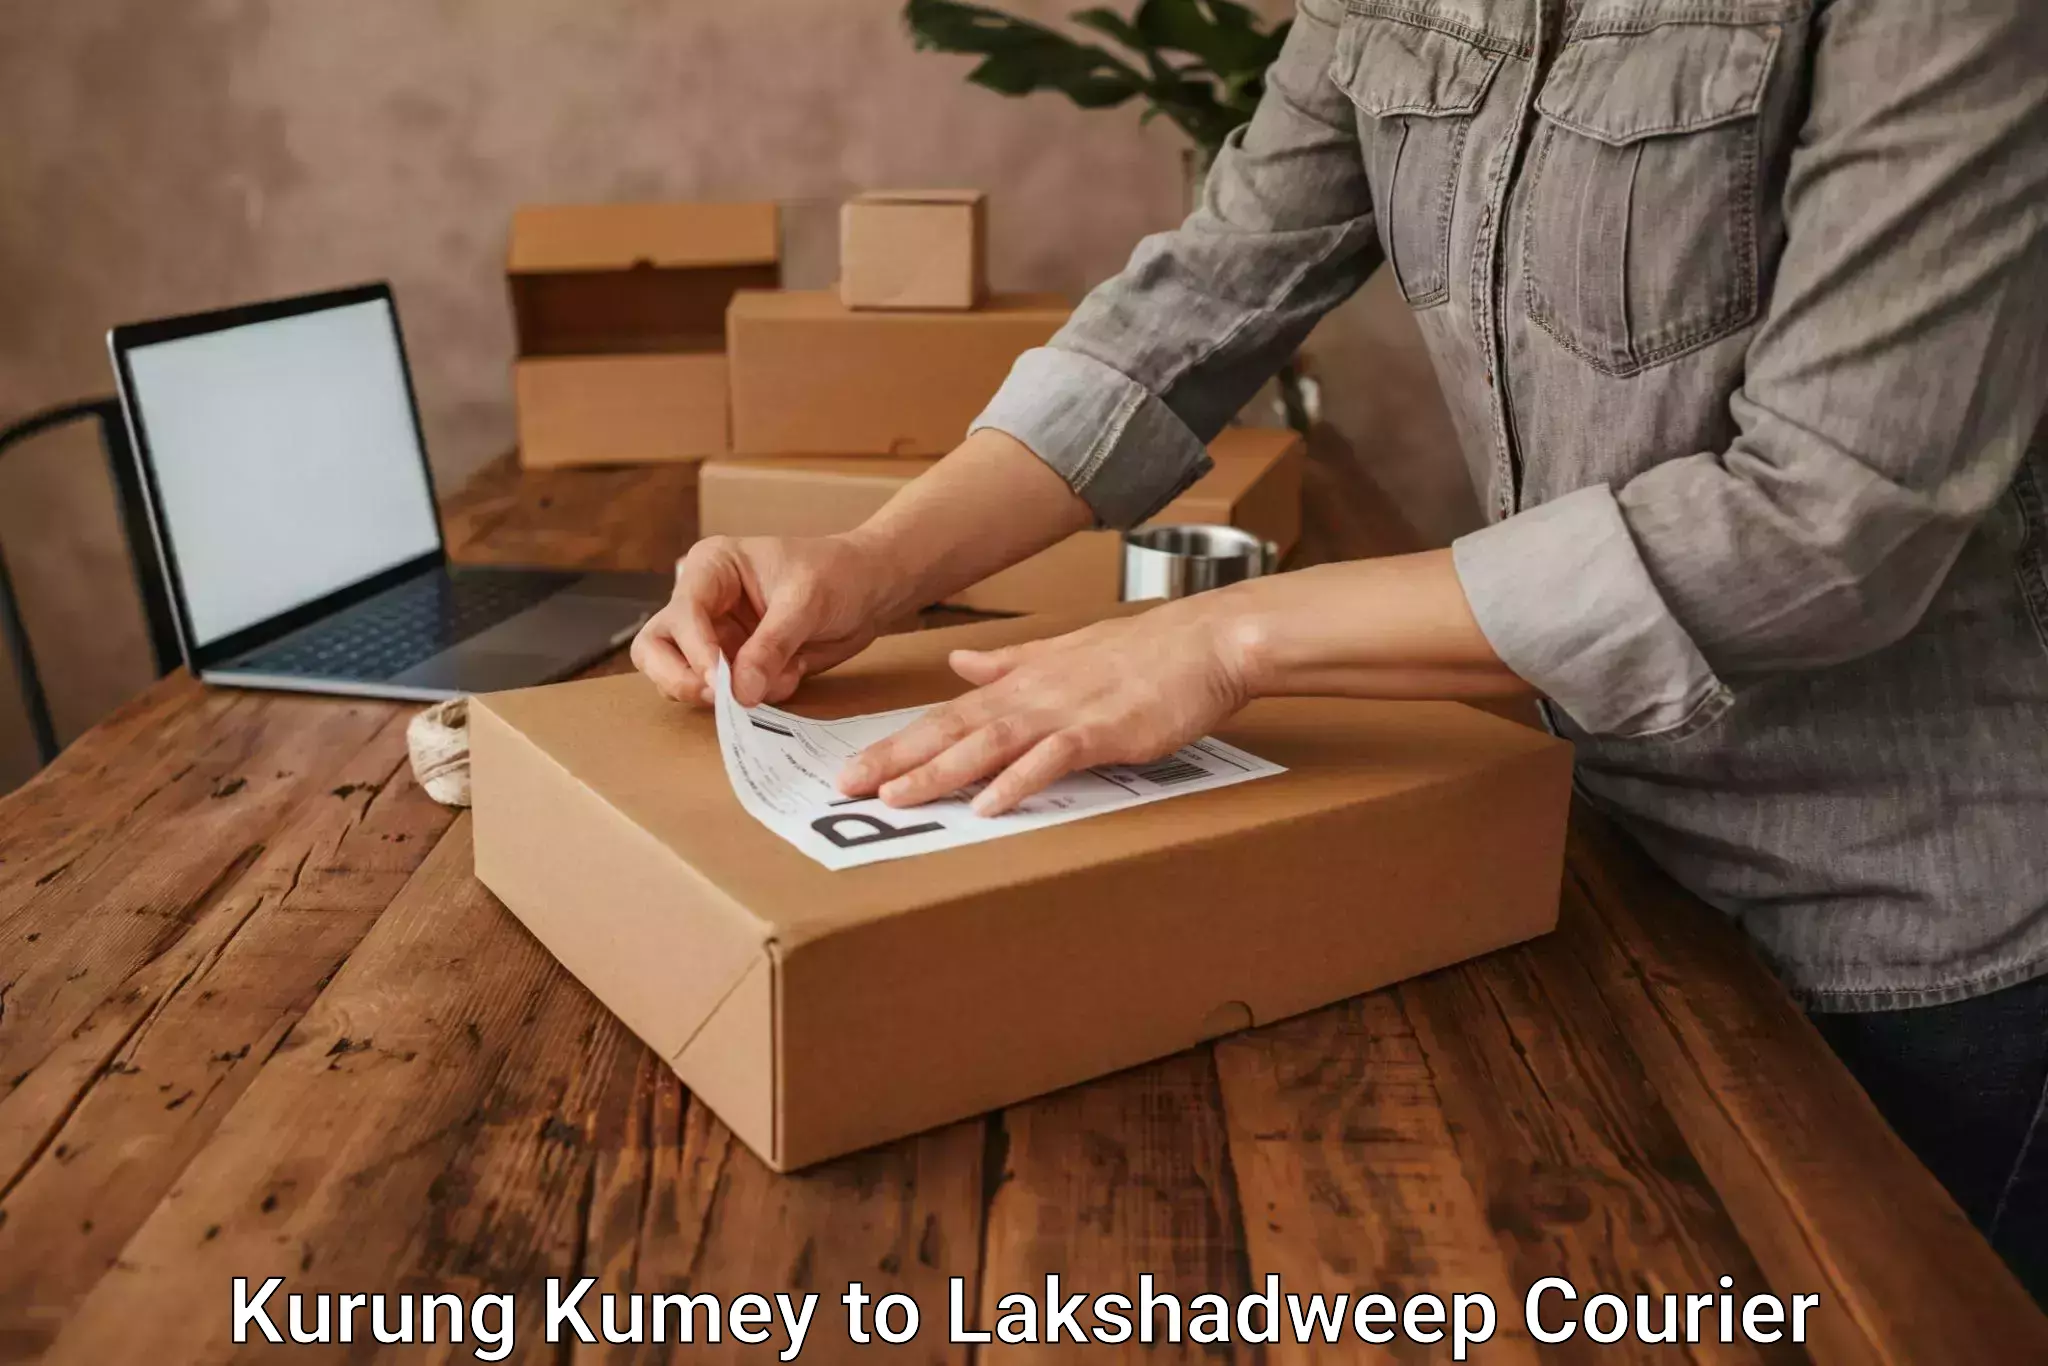 Next-day delivery options in Kurung Kumey to Lakshadweep